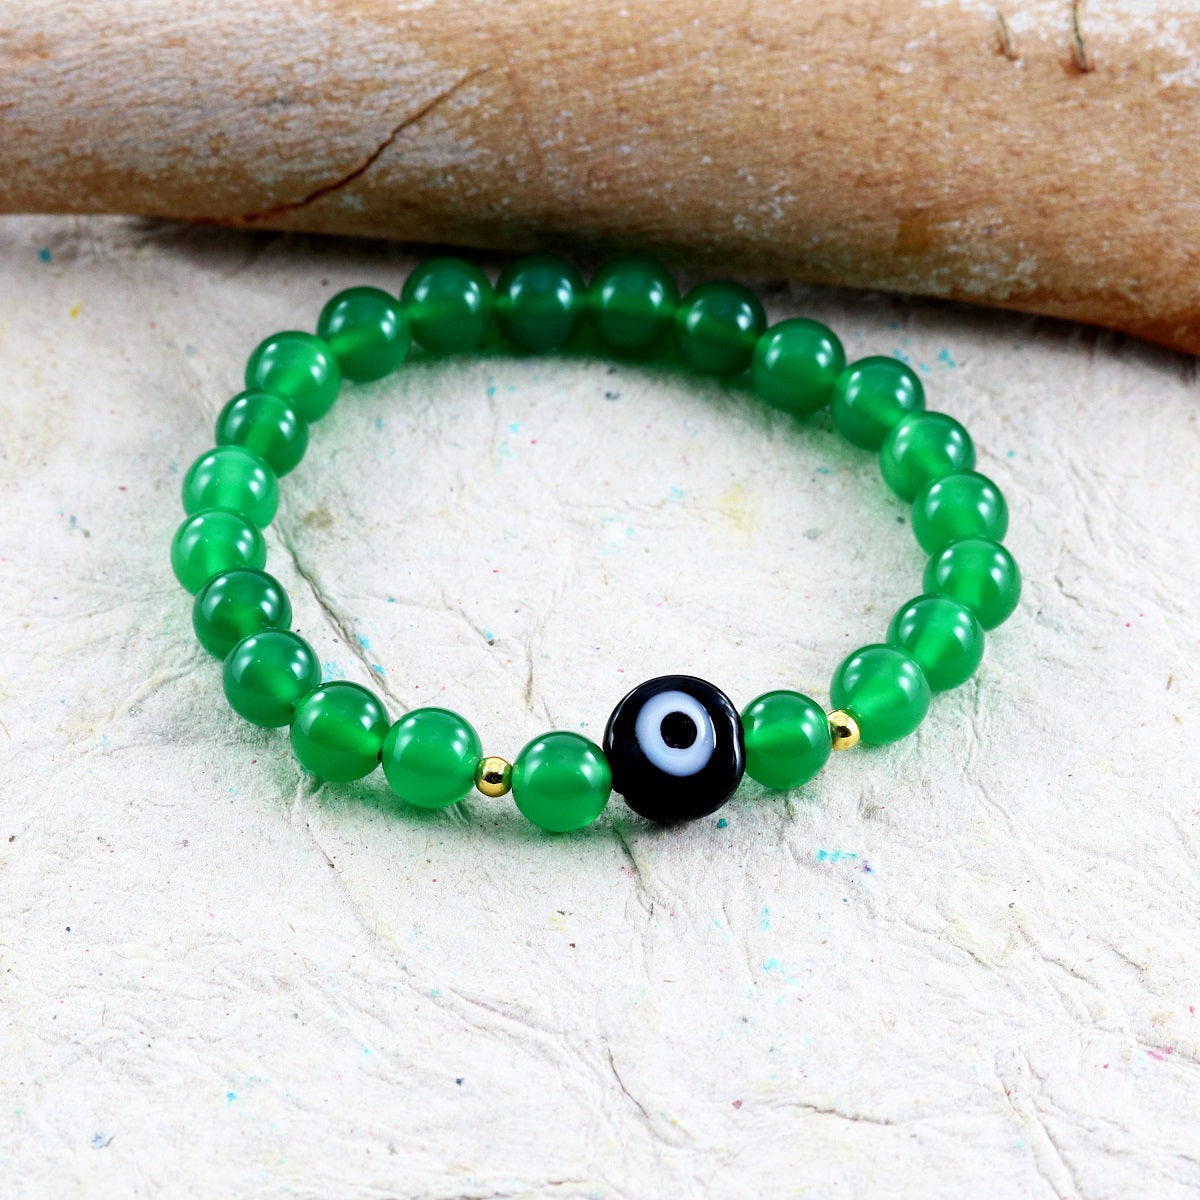 Friendship bracelet showcasing the blend of Green Onyx and Hematite beads on a stretchable cord.